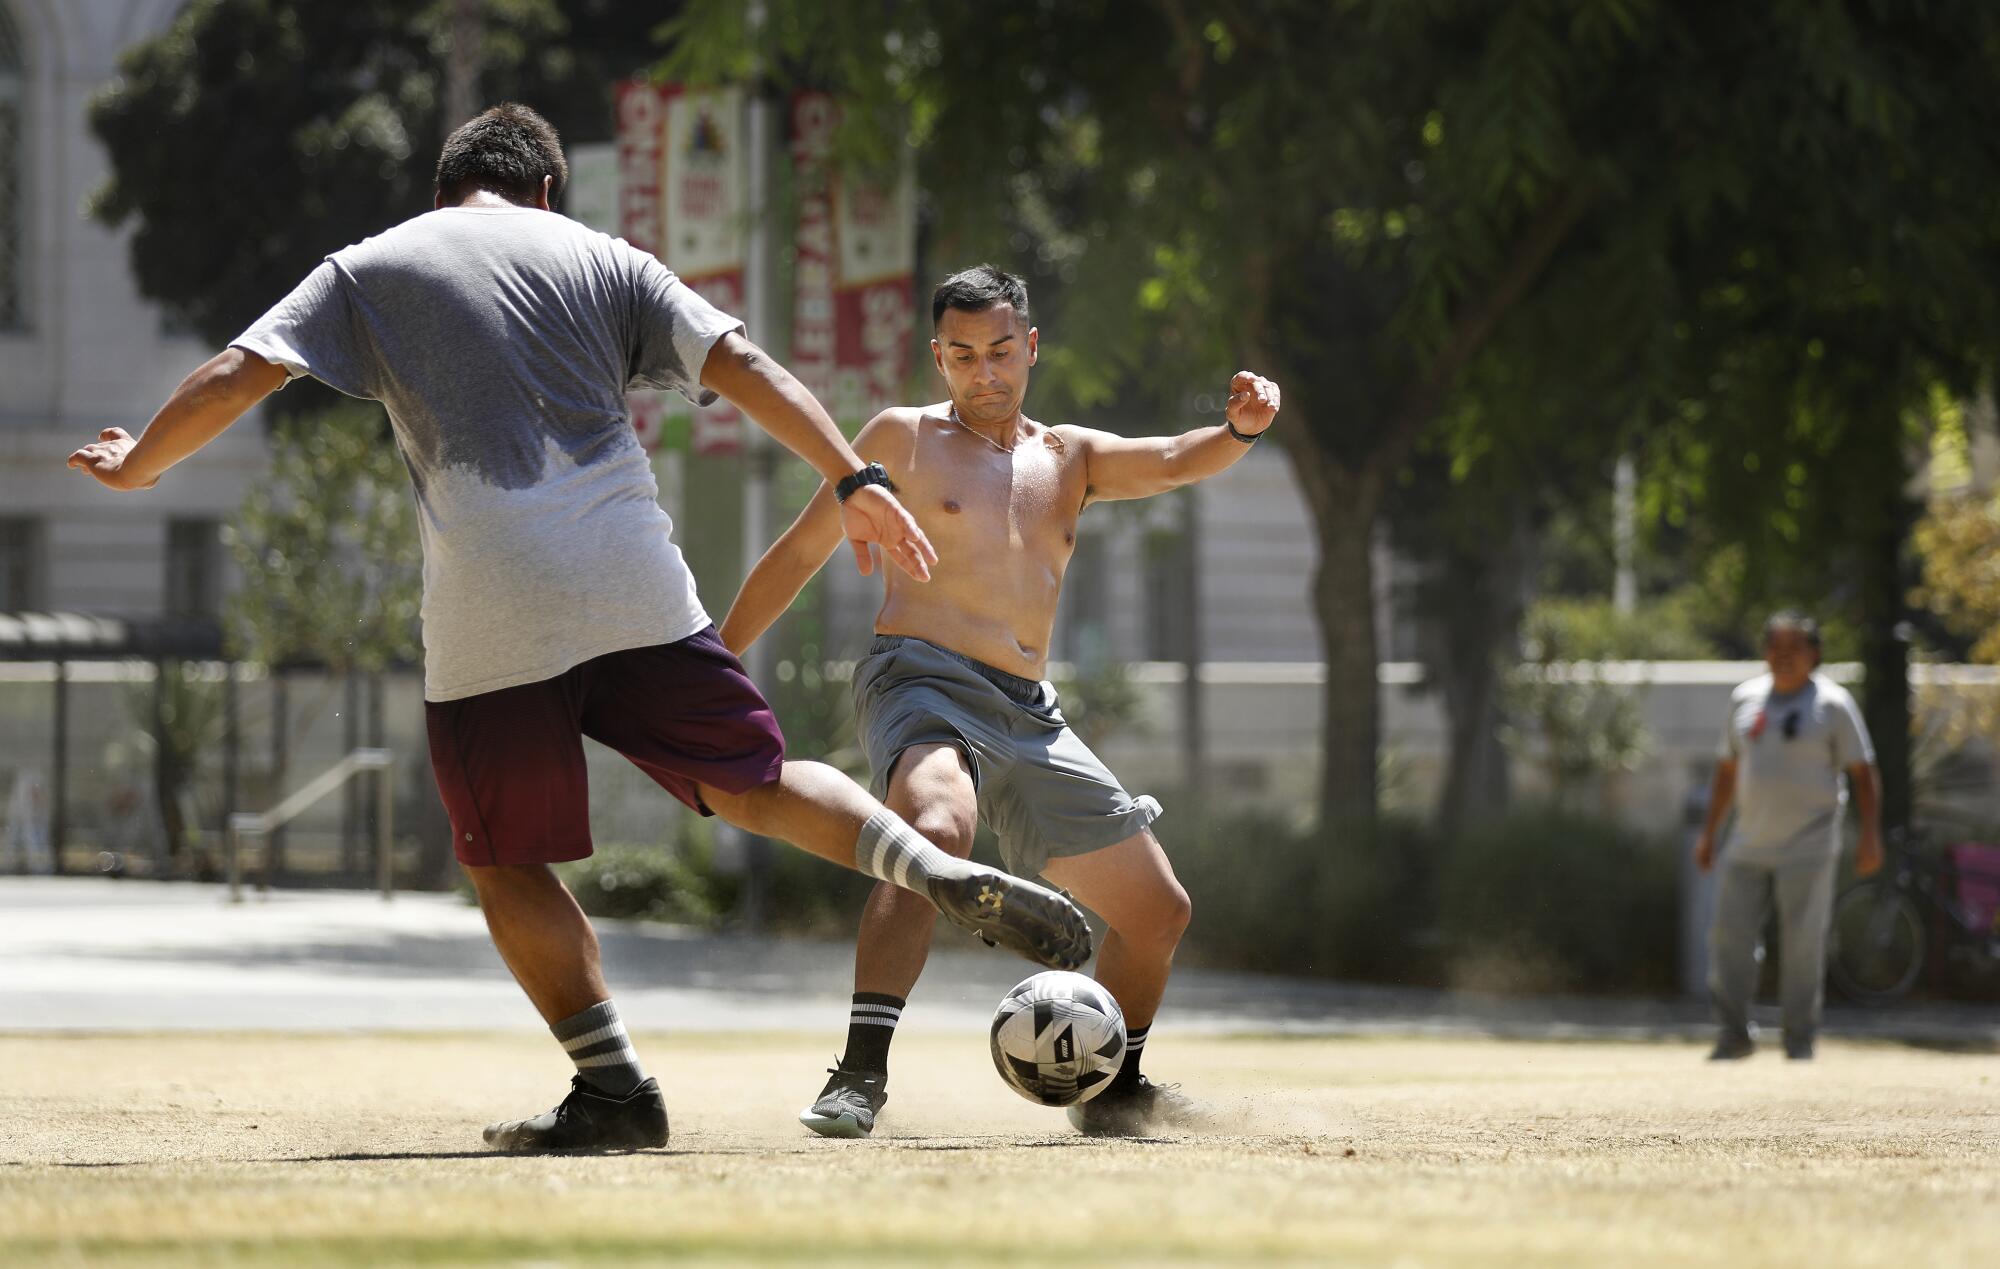 David Orantes, left, and Julio Ruiz play soccer in the hot sun at Grand Park in downtown Los Angeles